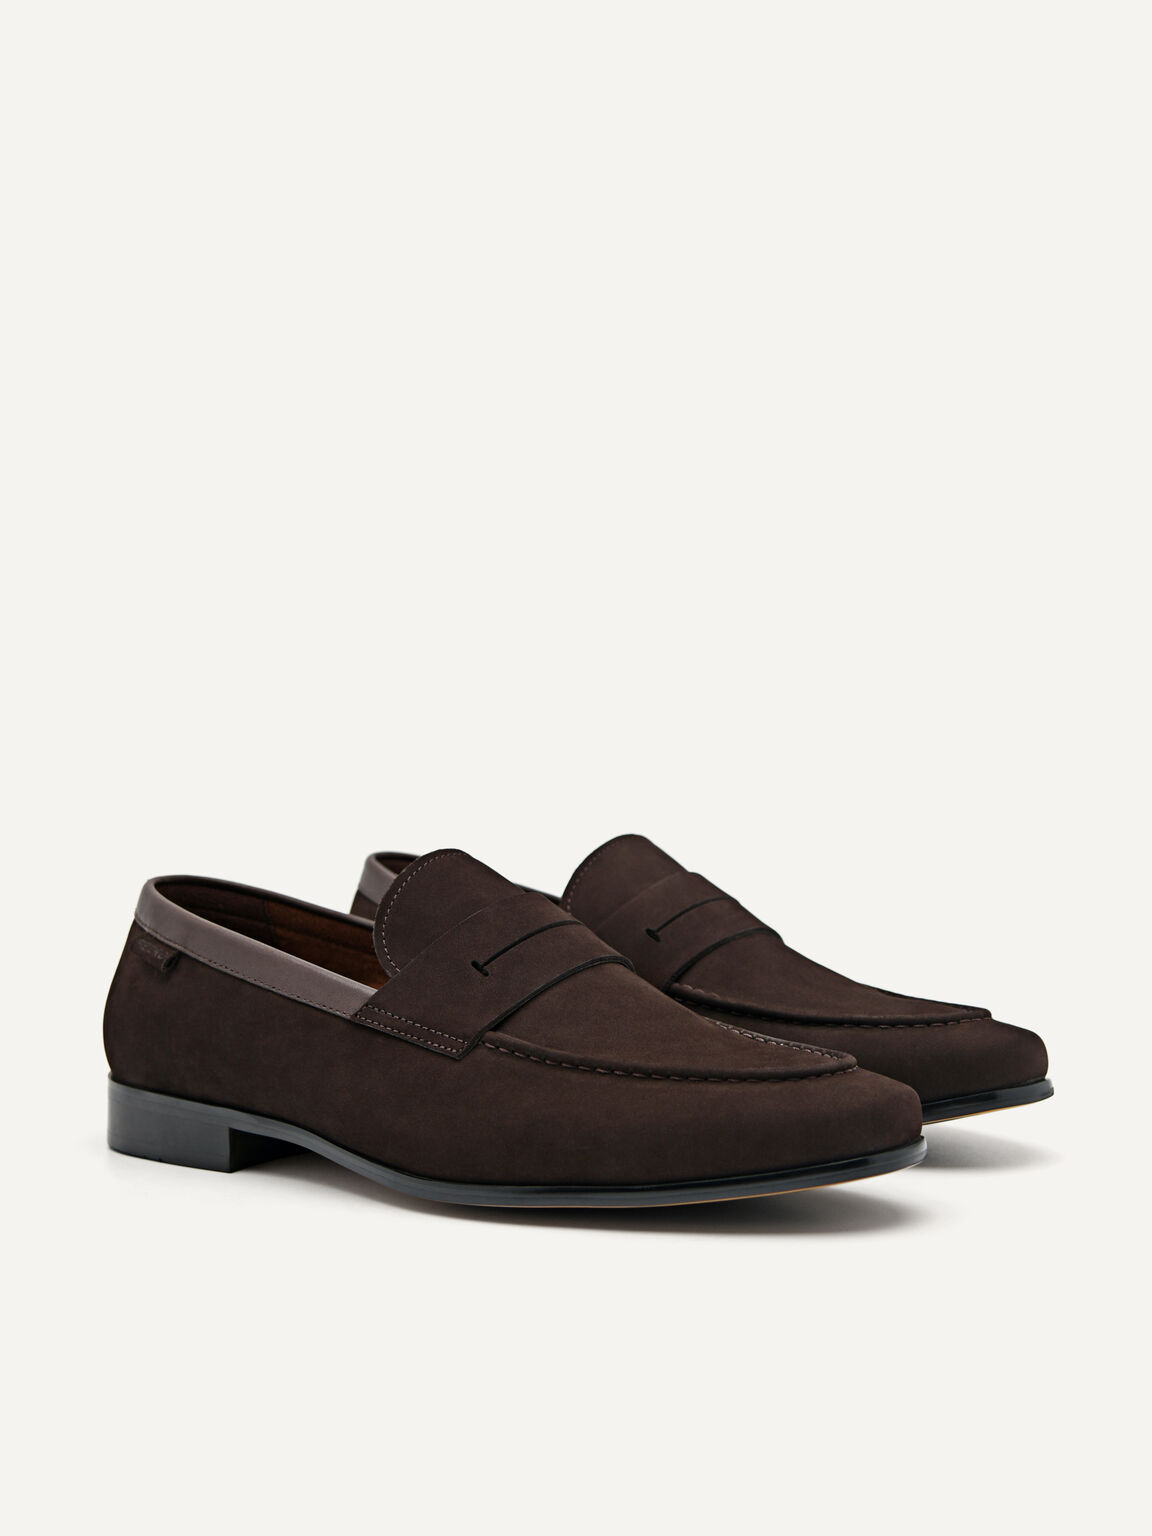 Dark Brown Firth Leather Loafers - PEDRO SG